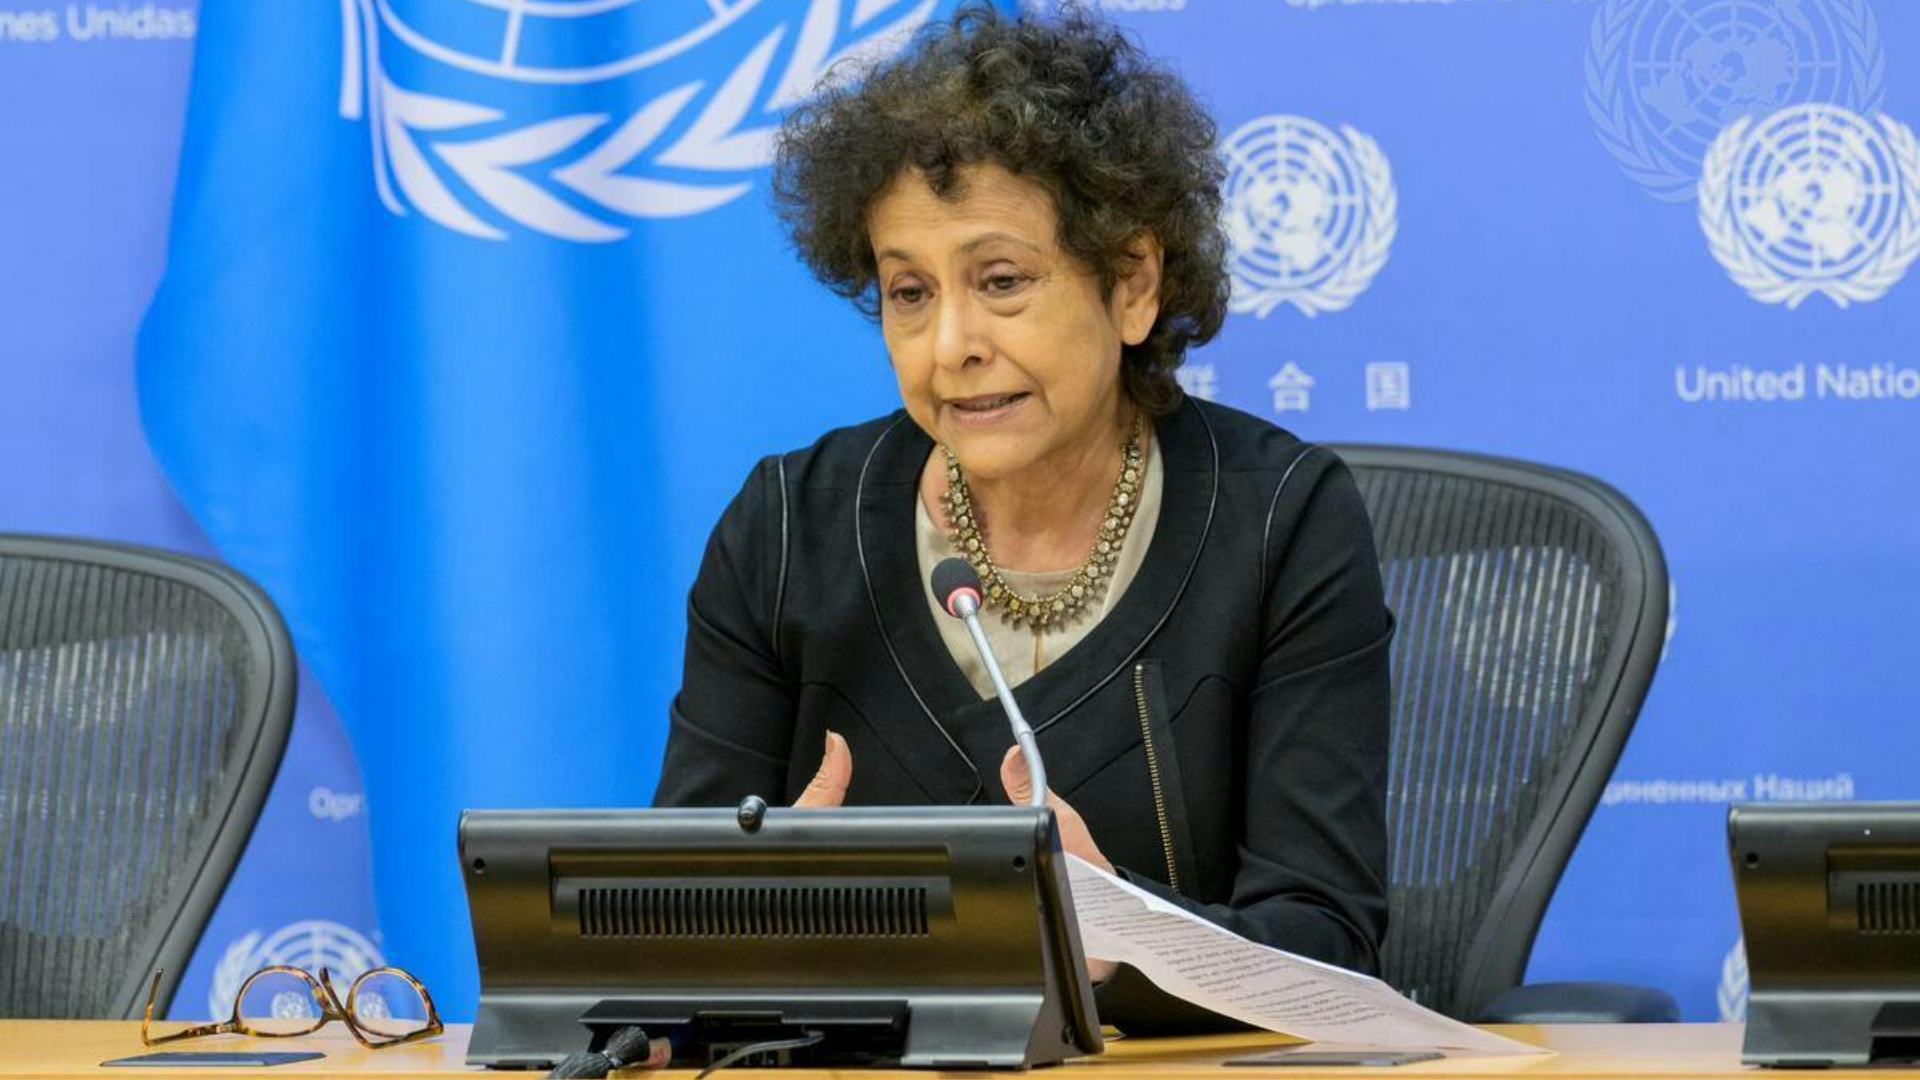 PH welcomes a UN Special Rapporteur to evaluate the human rights system.